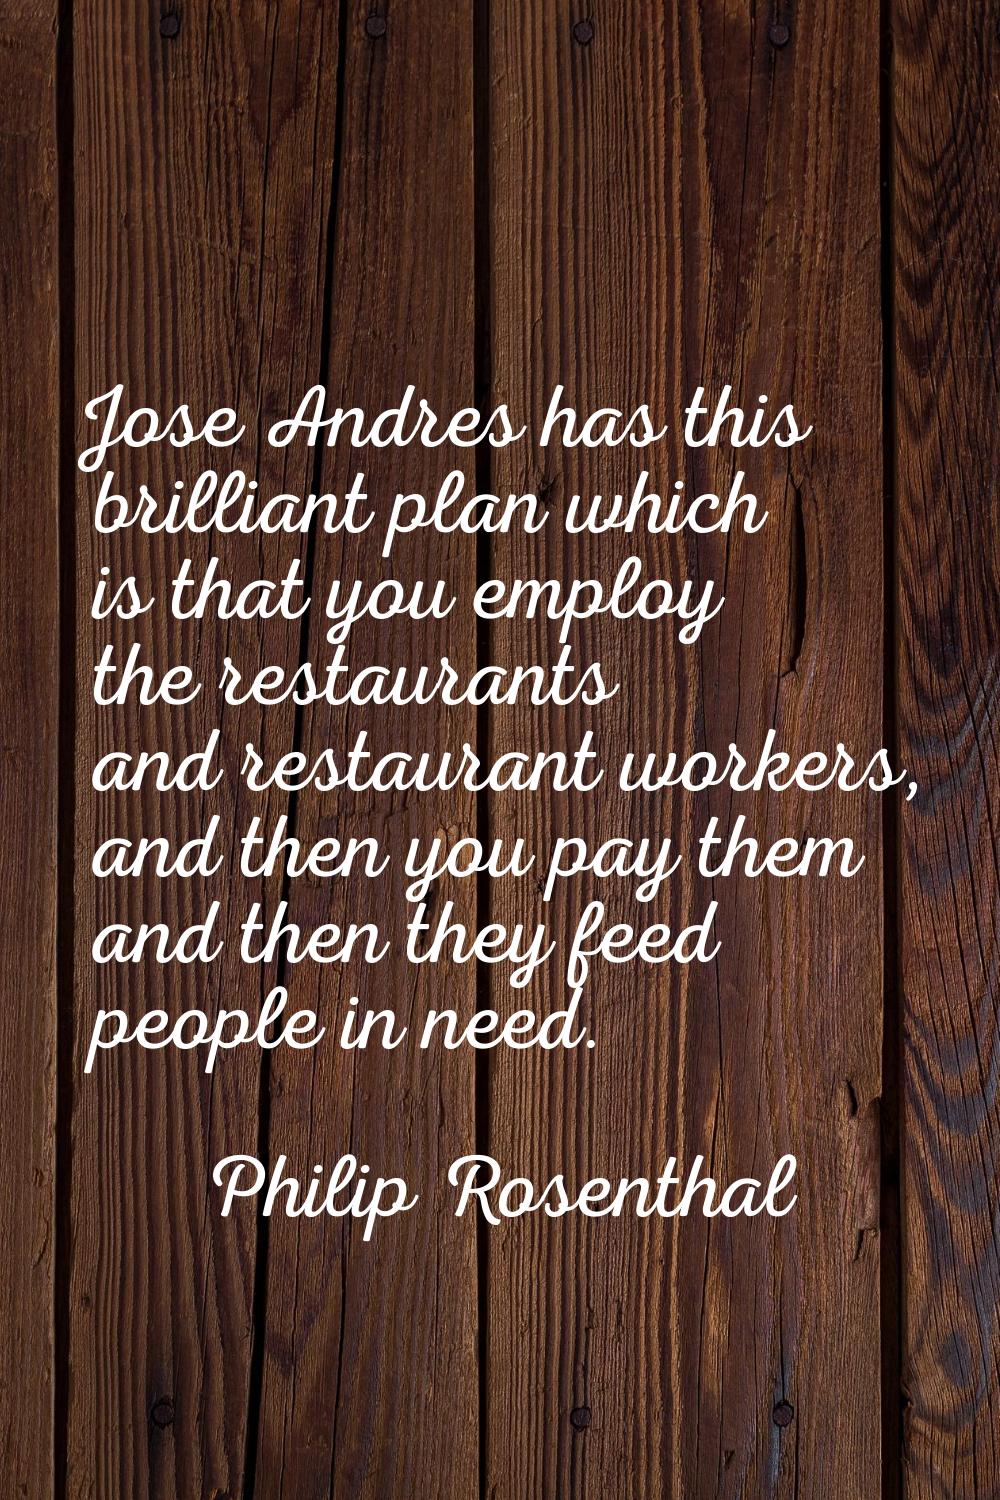 Jose Andres has this brilliant plan which is that you employ the restaurants and restaurant workers